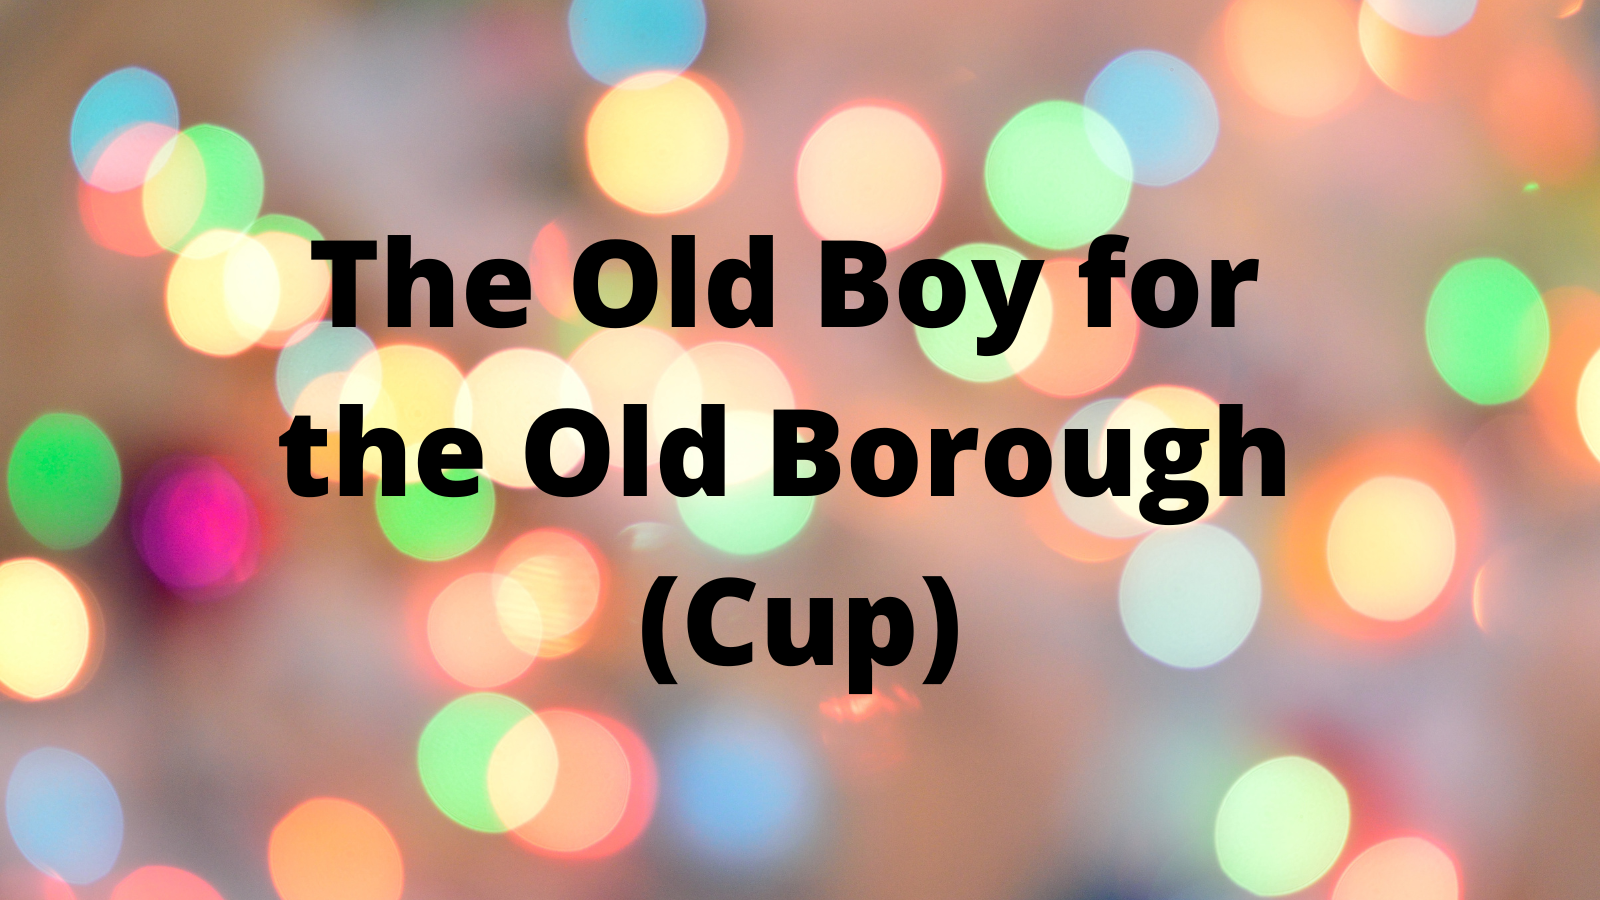 The Old Boy for the Old Borough (Cup)